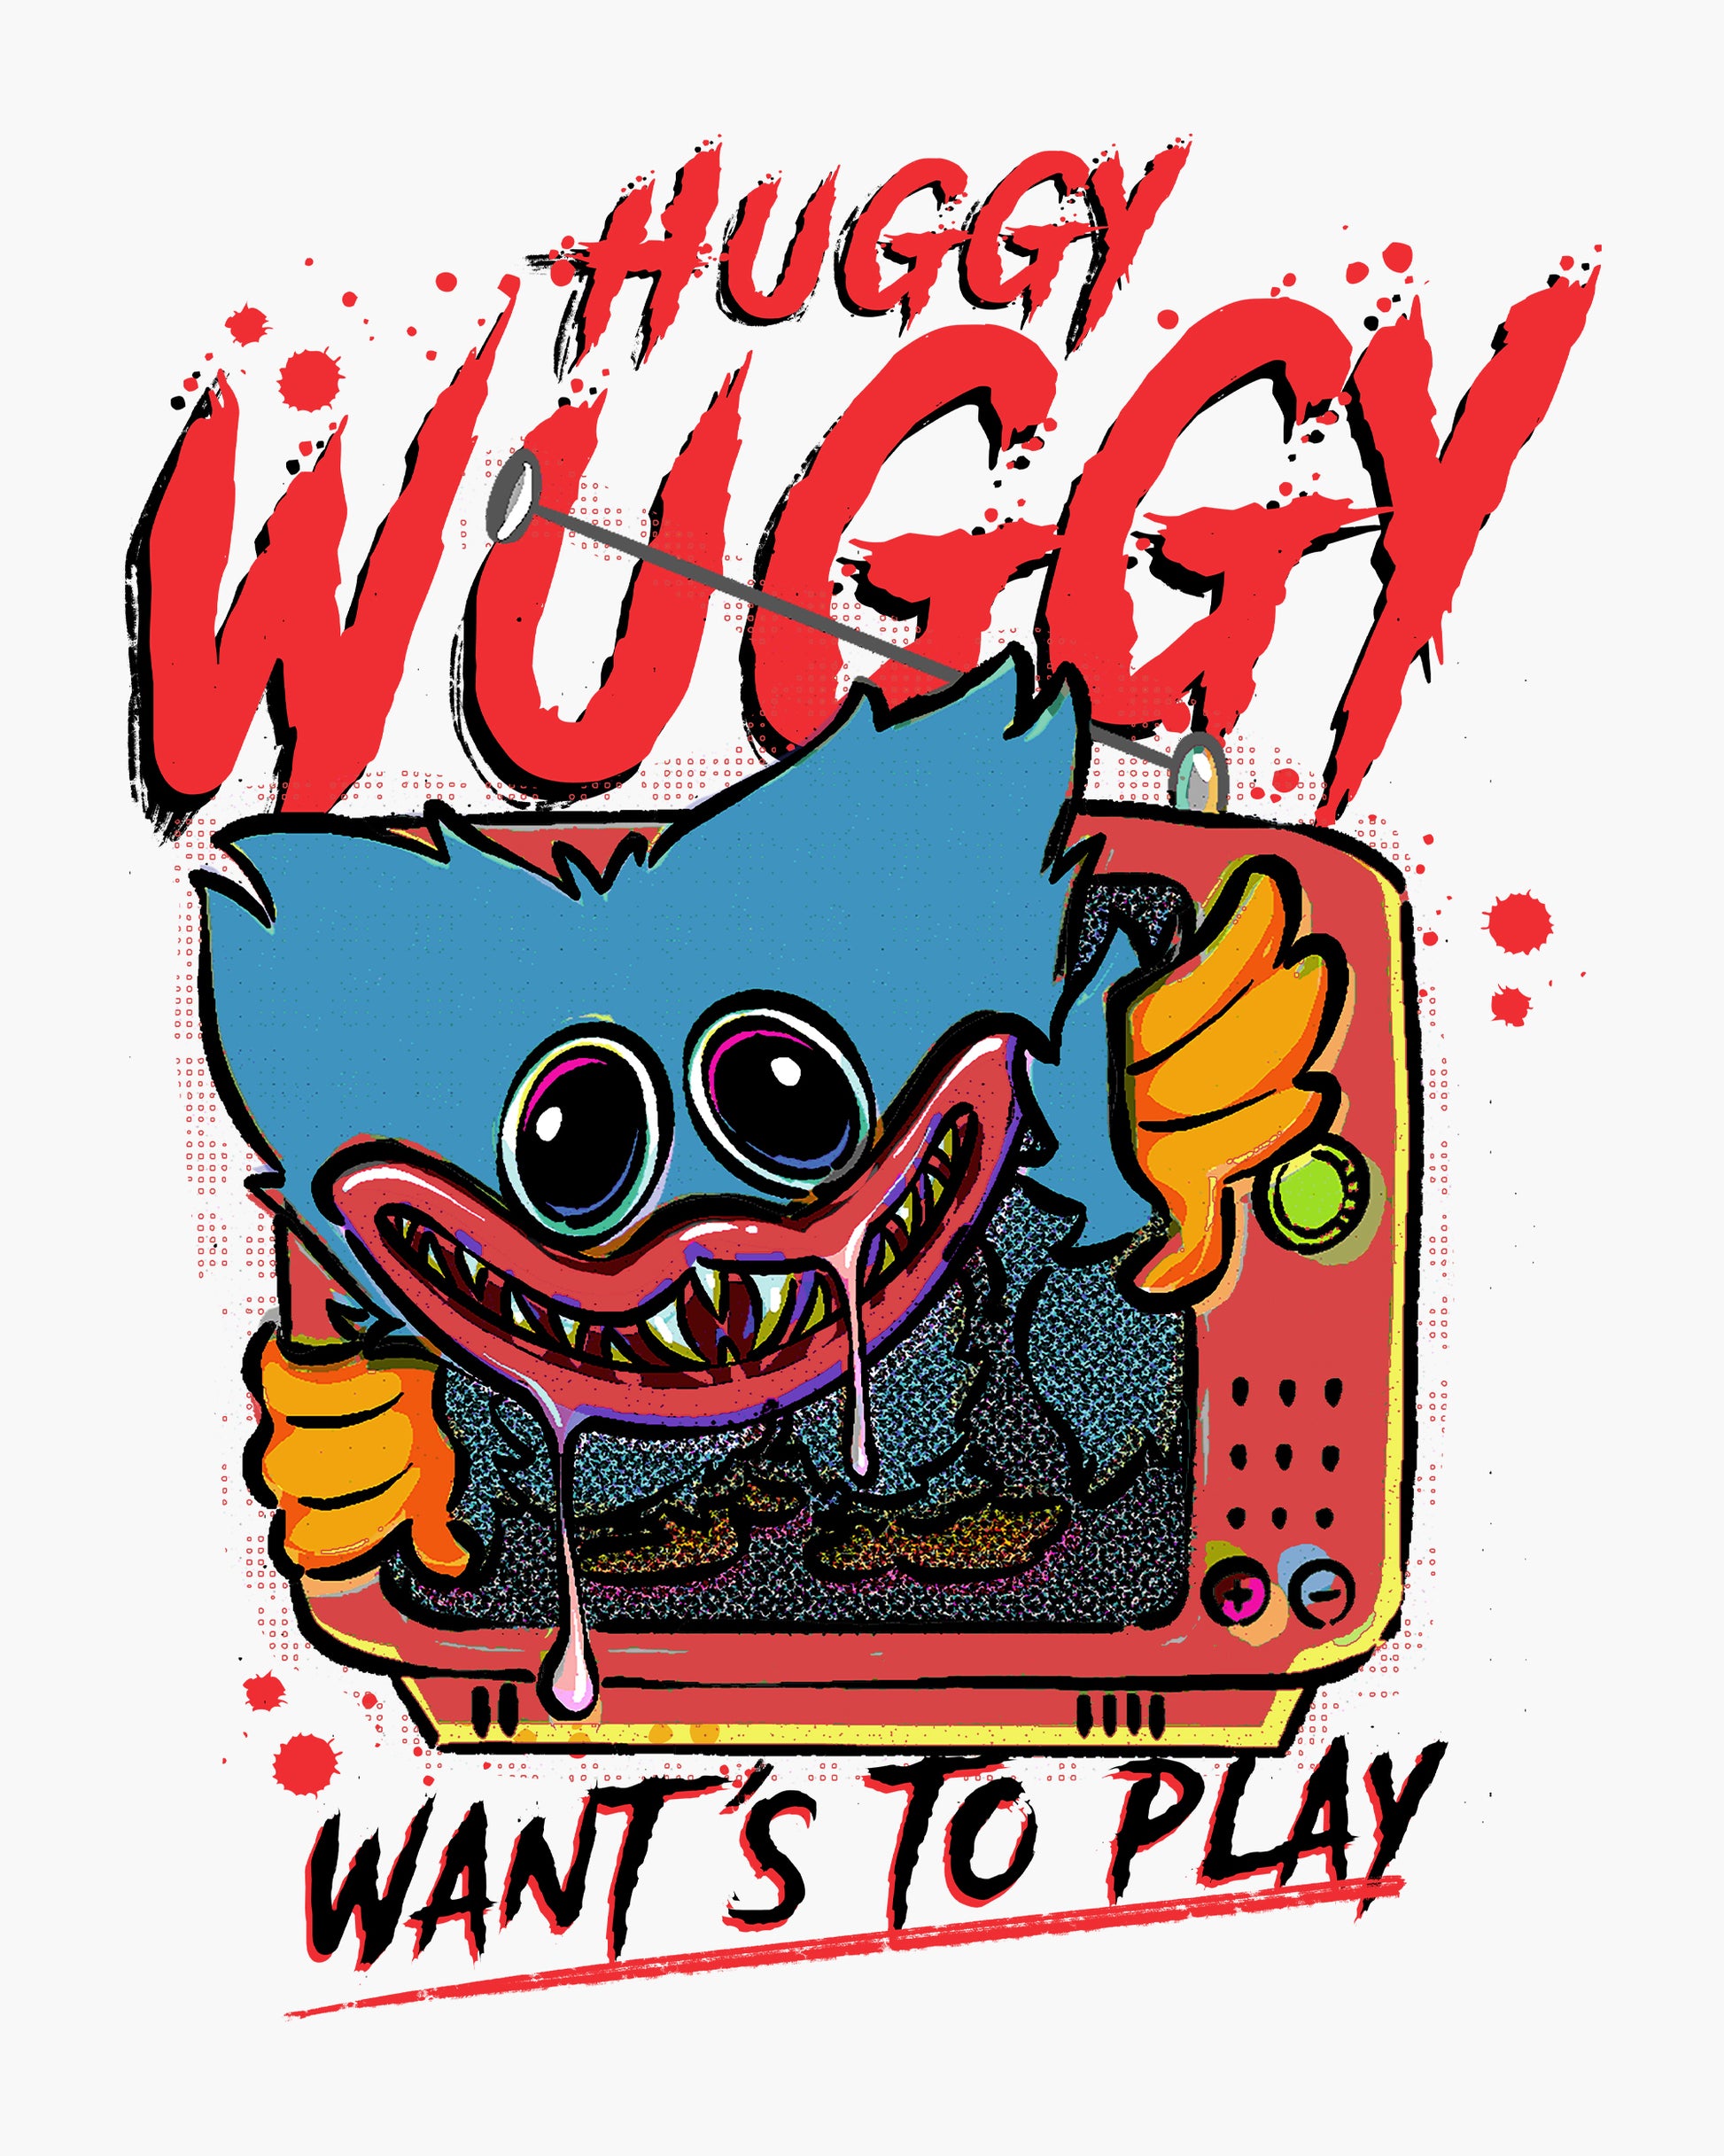 image on shirt: huggy wuggy coming out of TV set. text: huggy wuggy want's to play